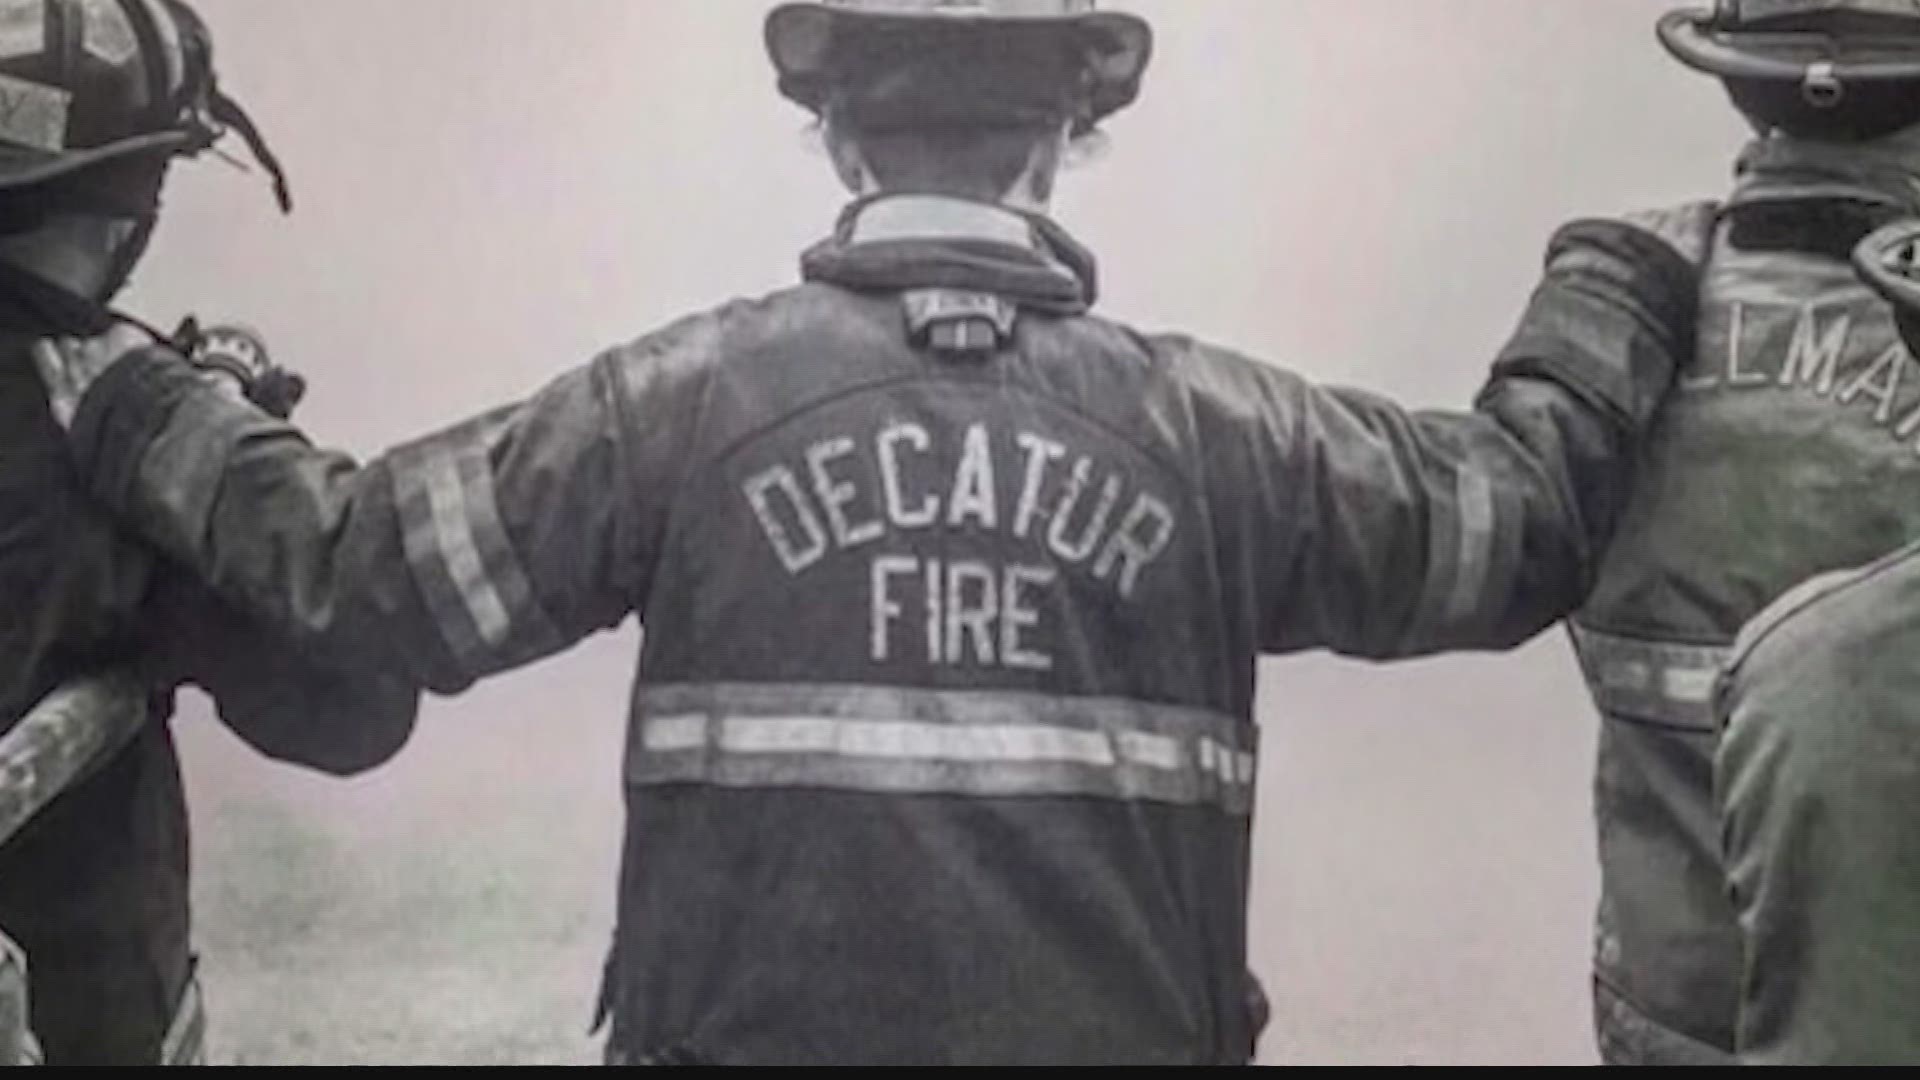 Lt. Shaun Chandler has served as a firefighter at Decatur Fire Rescue for 25 years and is now retired.